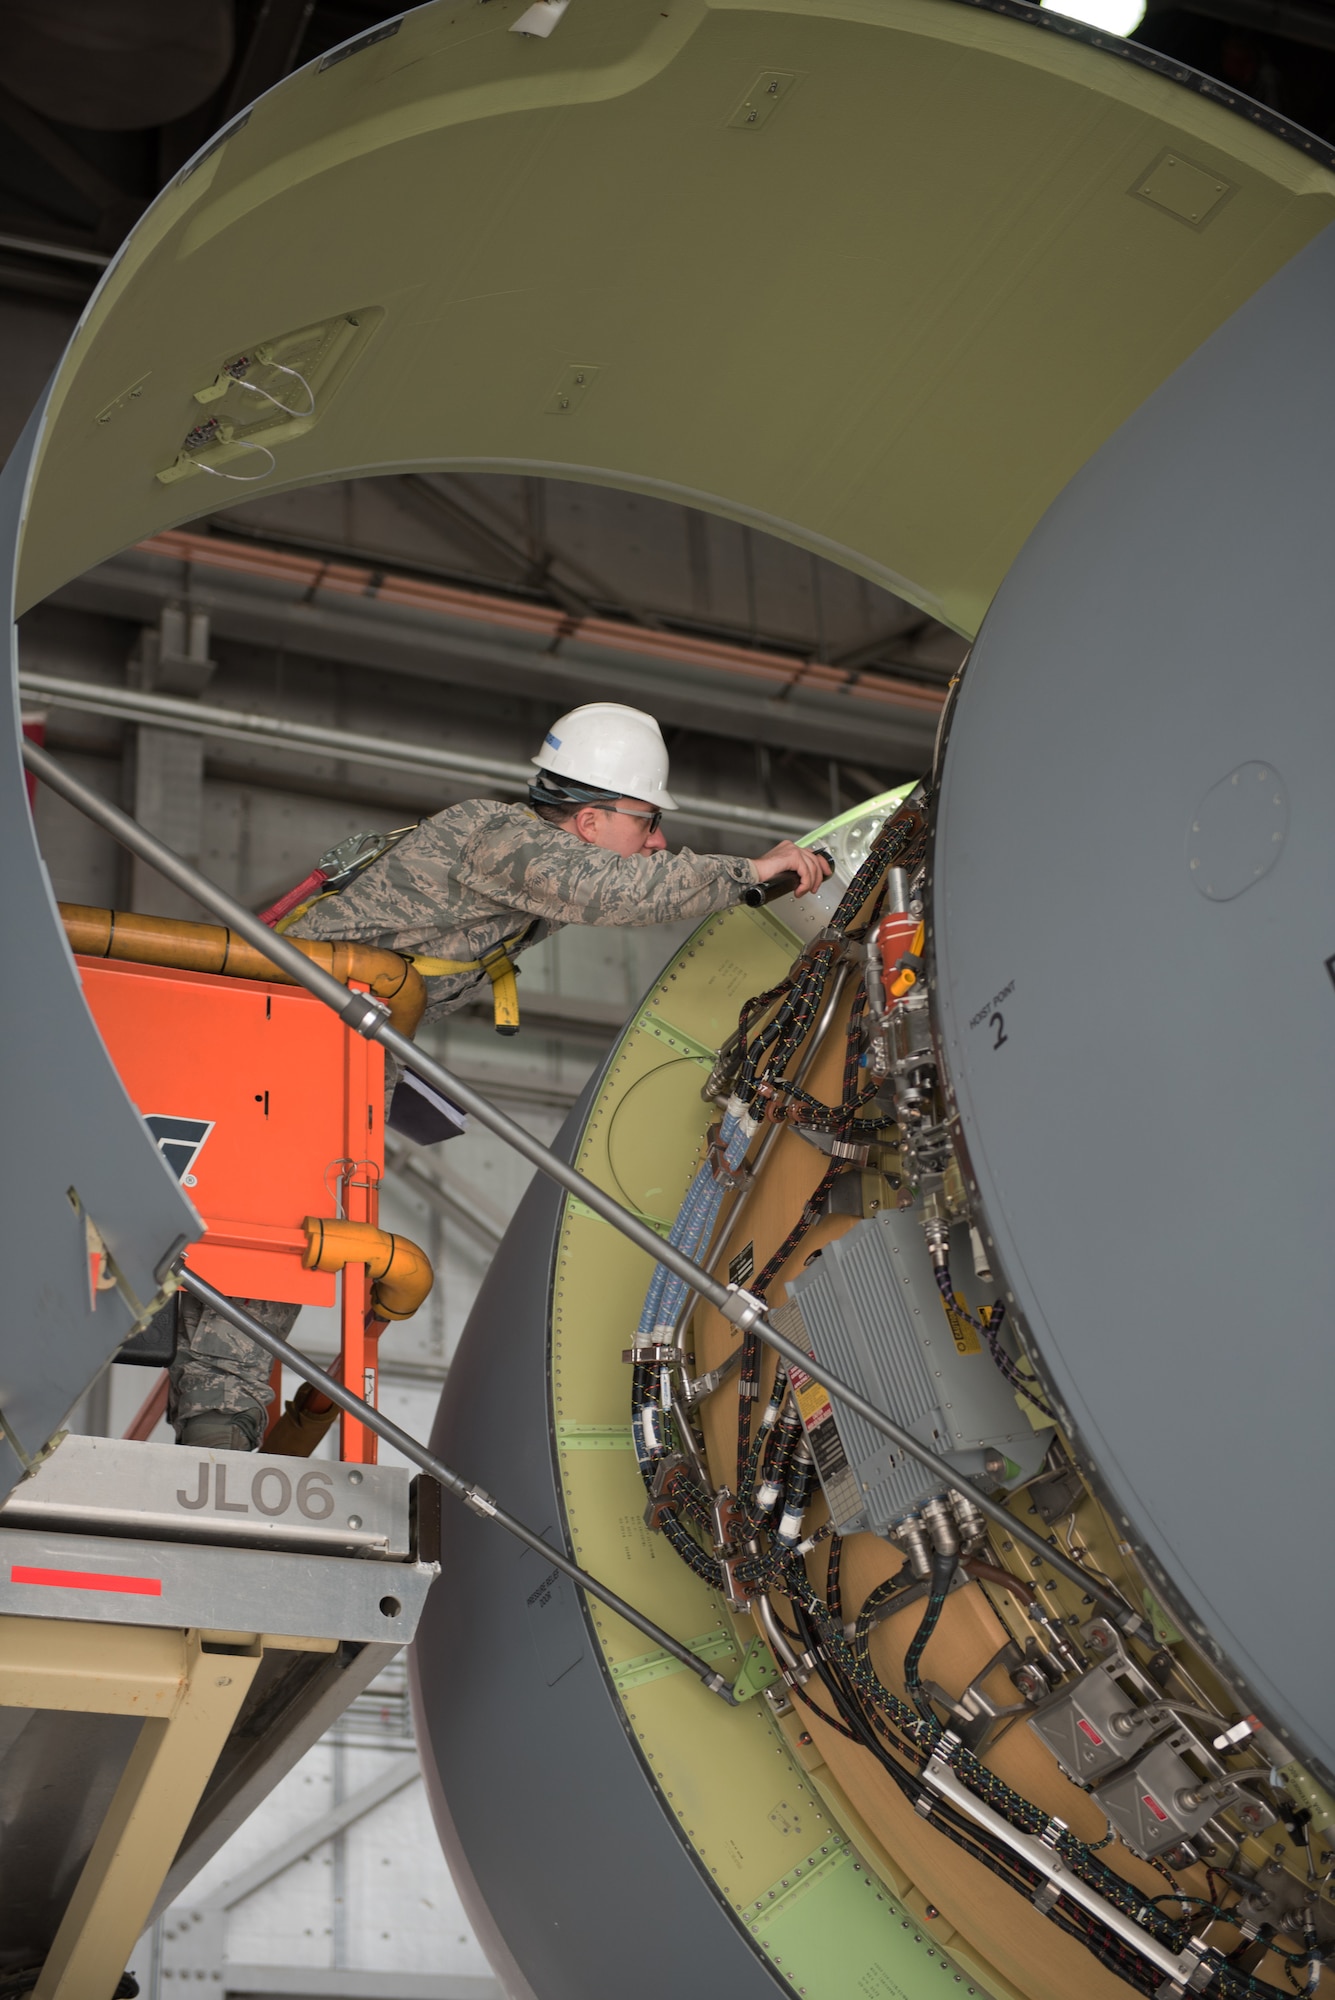 U.S. Air Force Senior Airman Matthew Malich, 60th Aircraft Maintenance Squadron aerospace propulsion journeyman, inspects a C-5M Super Galaxy Jan. 28, 2019 at Travis Air Force Base, Calif. Regular maintenance ensures the C-5 is mission ready and the 60th Maintenance Group's Maintenance Operations Center coordinates all aircraft maintenance actions at Travis. (U.S. Air Force photo by Tech. Sgt. James Hodgman)